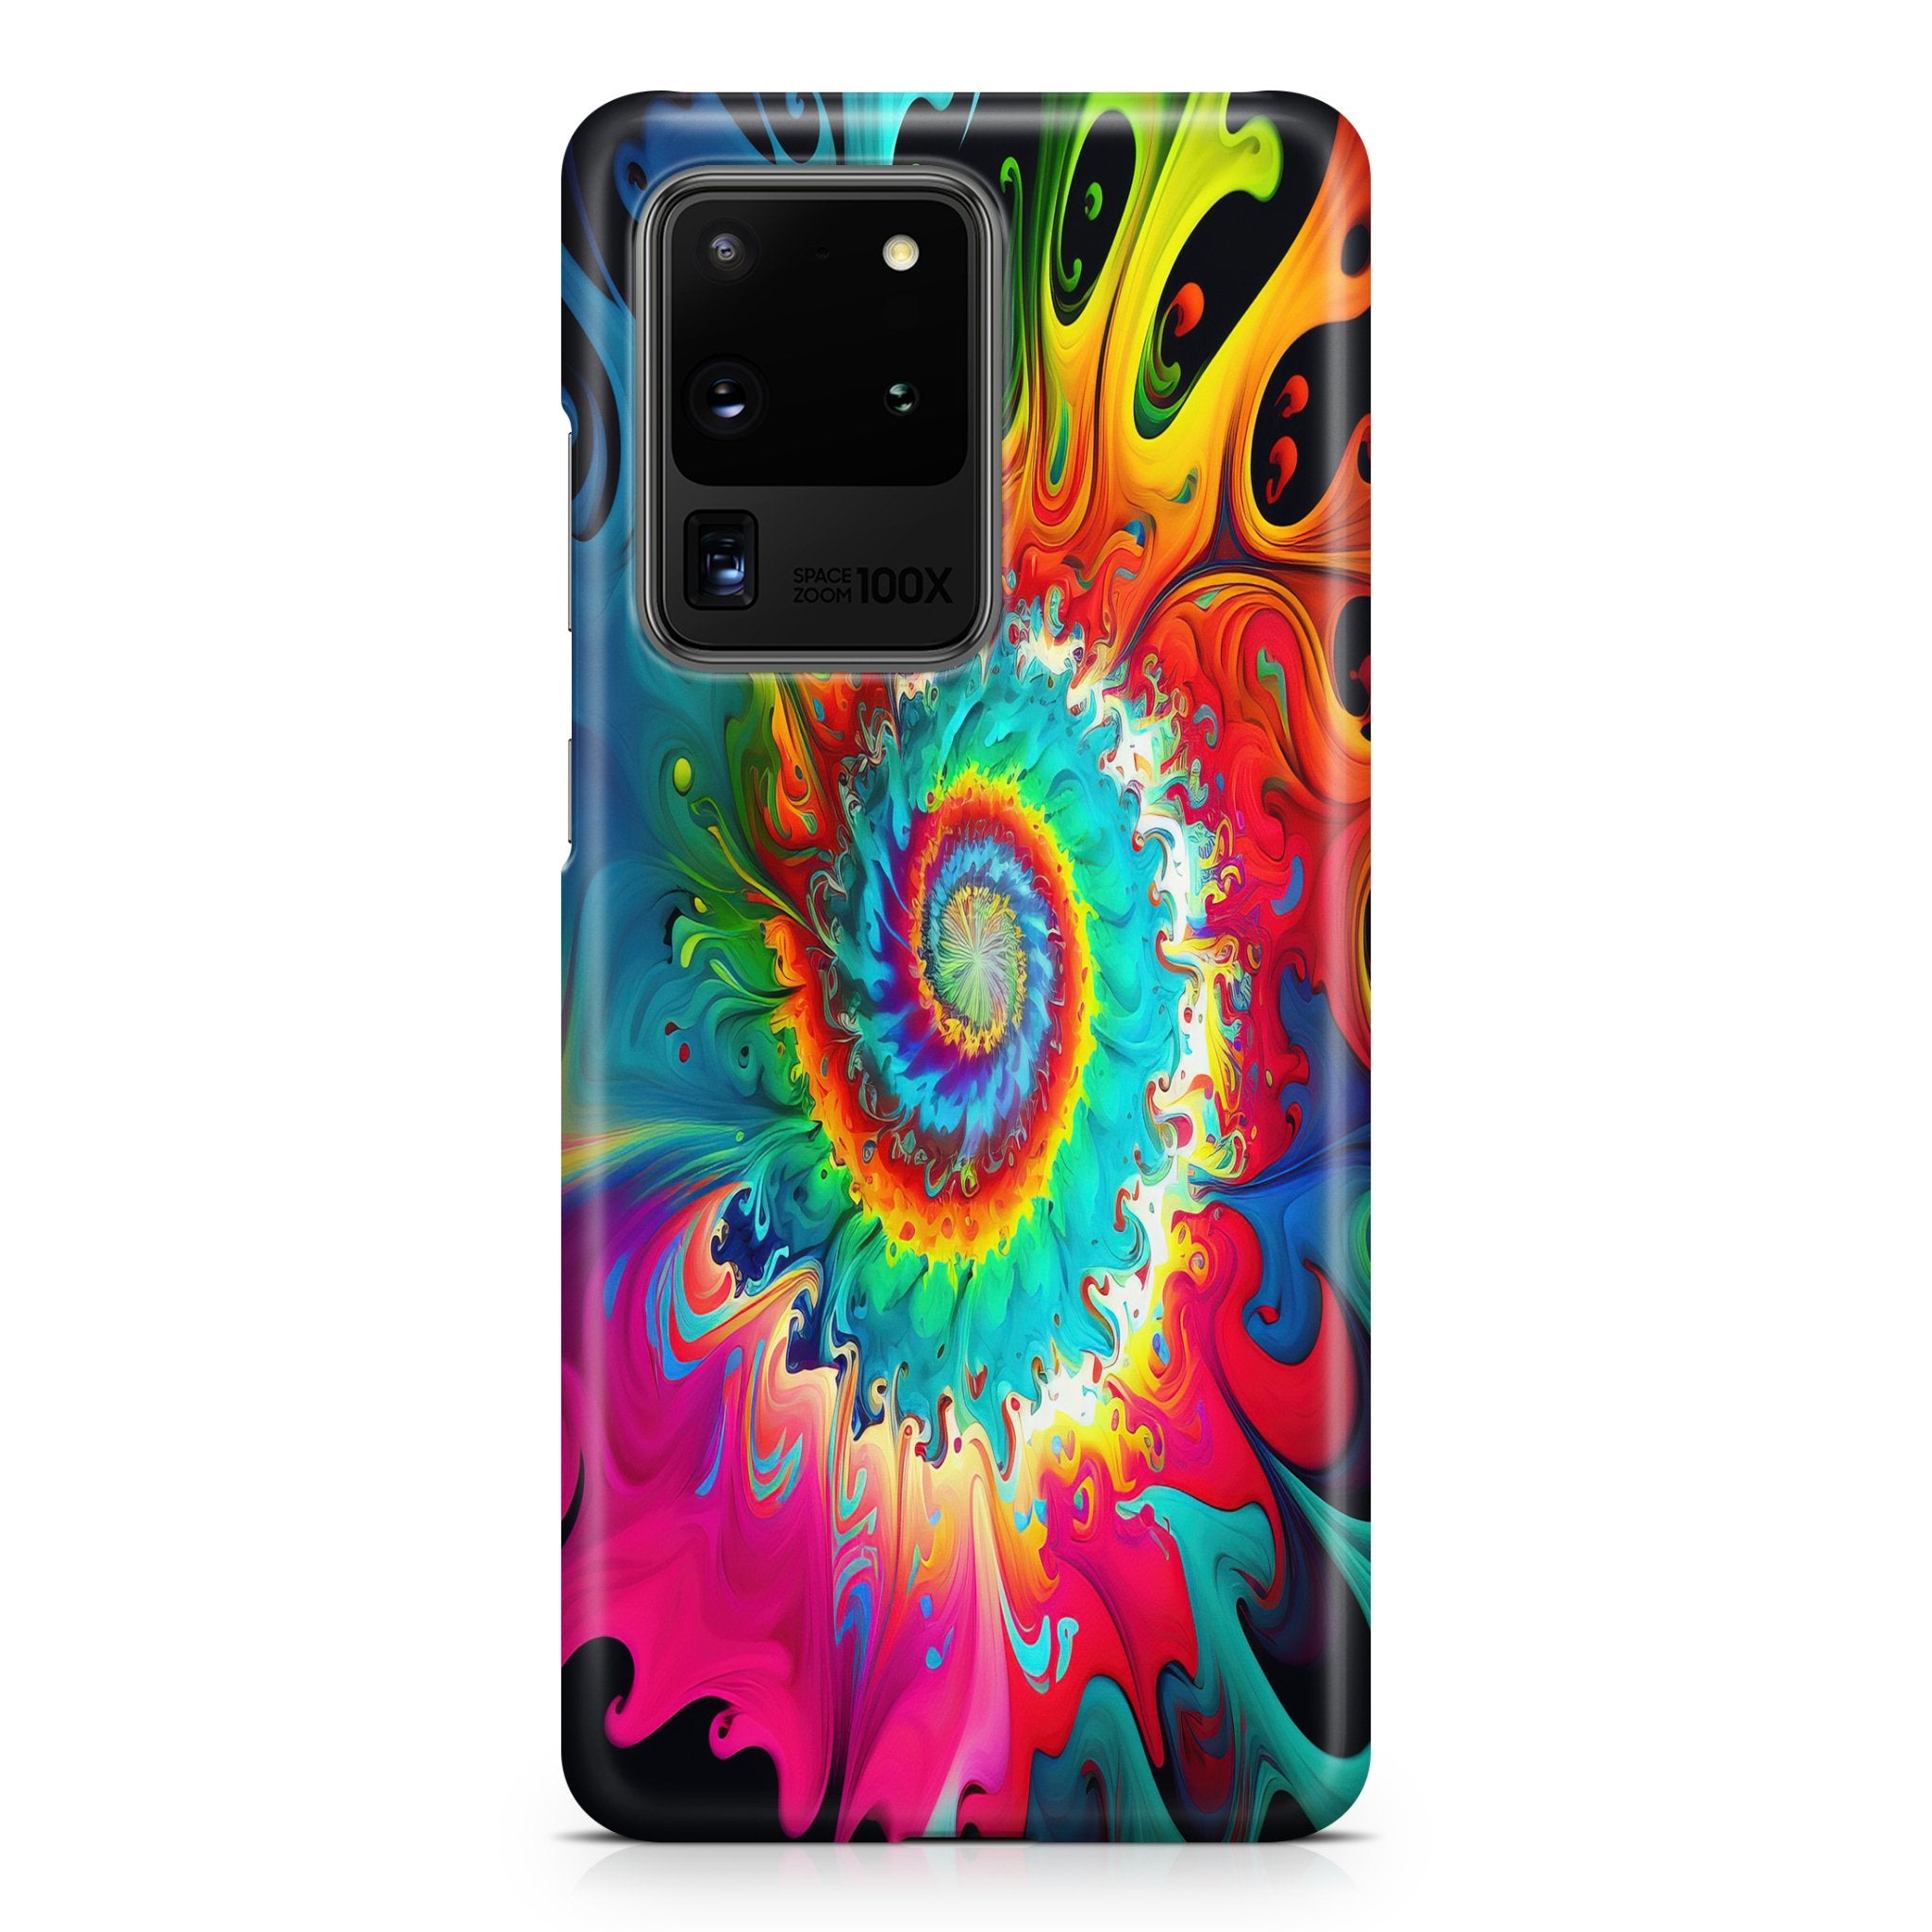 Twist of Fate - Samsung phone case designs by CaseSwagger